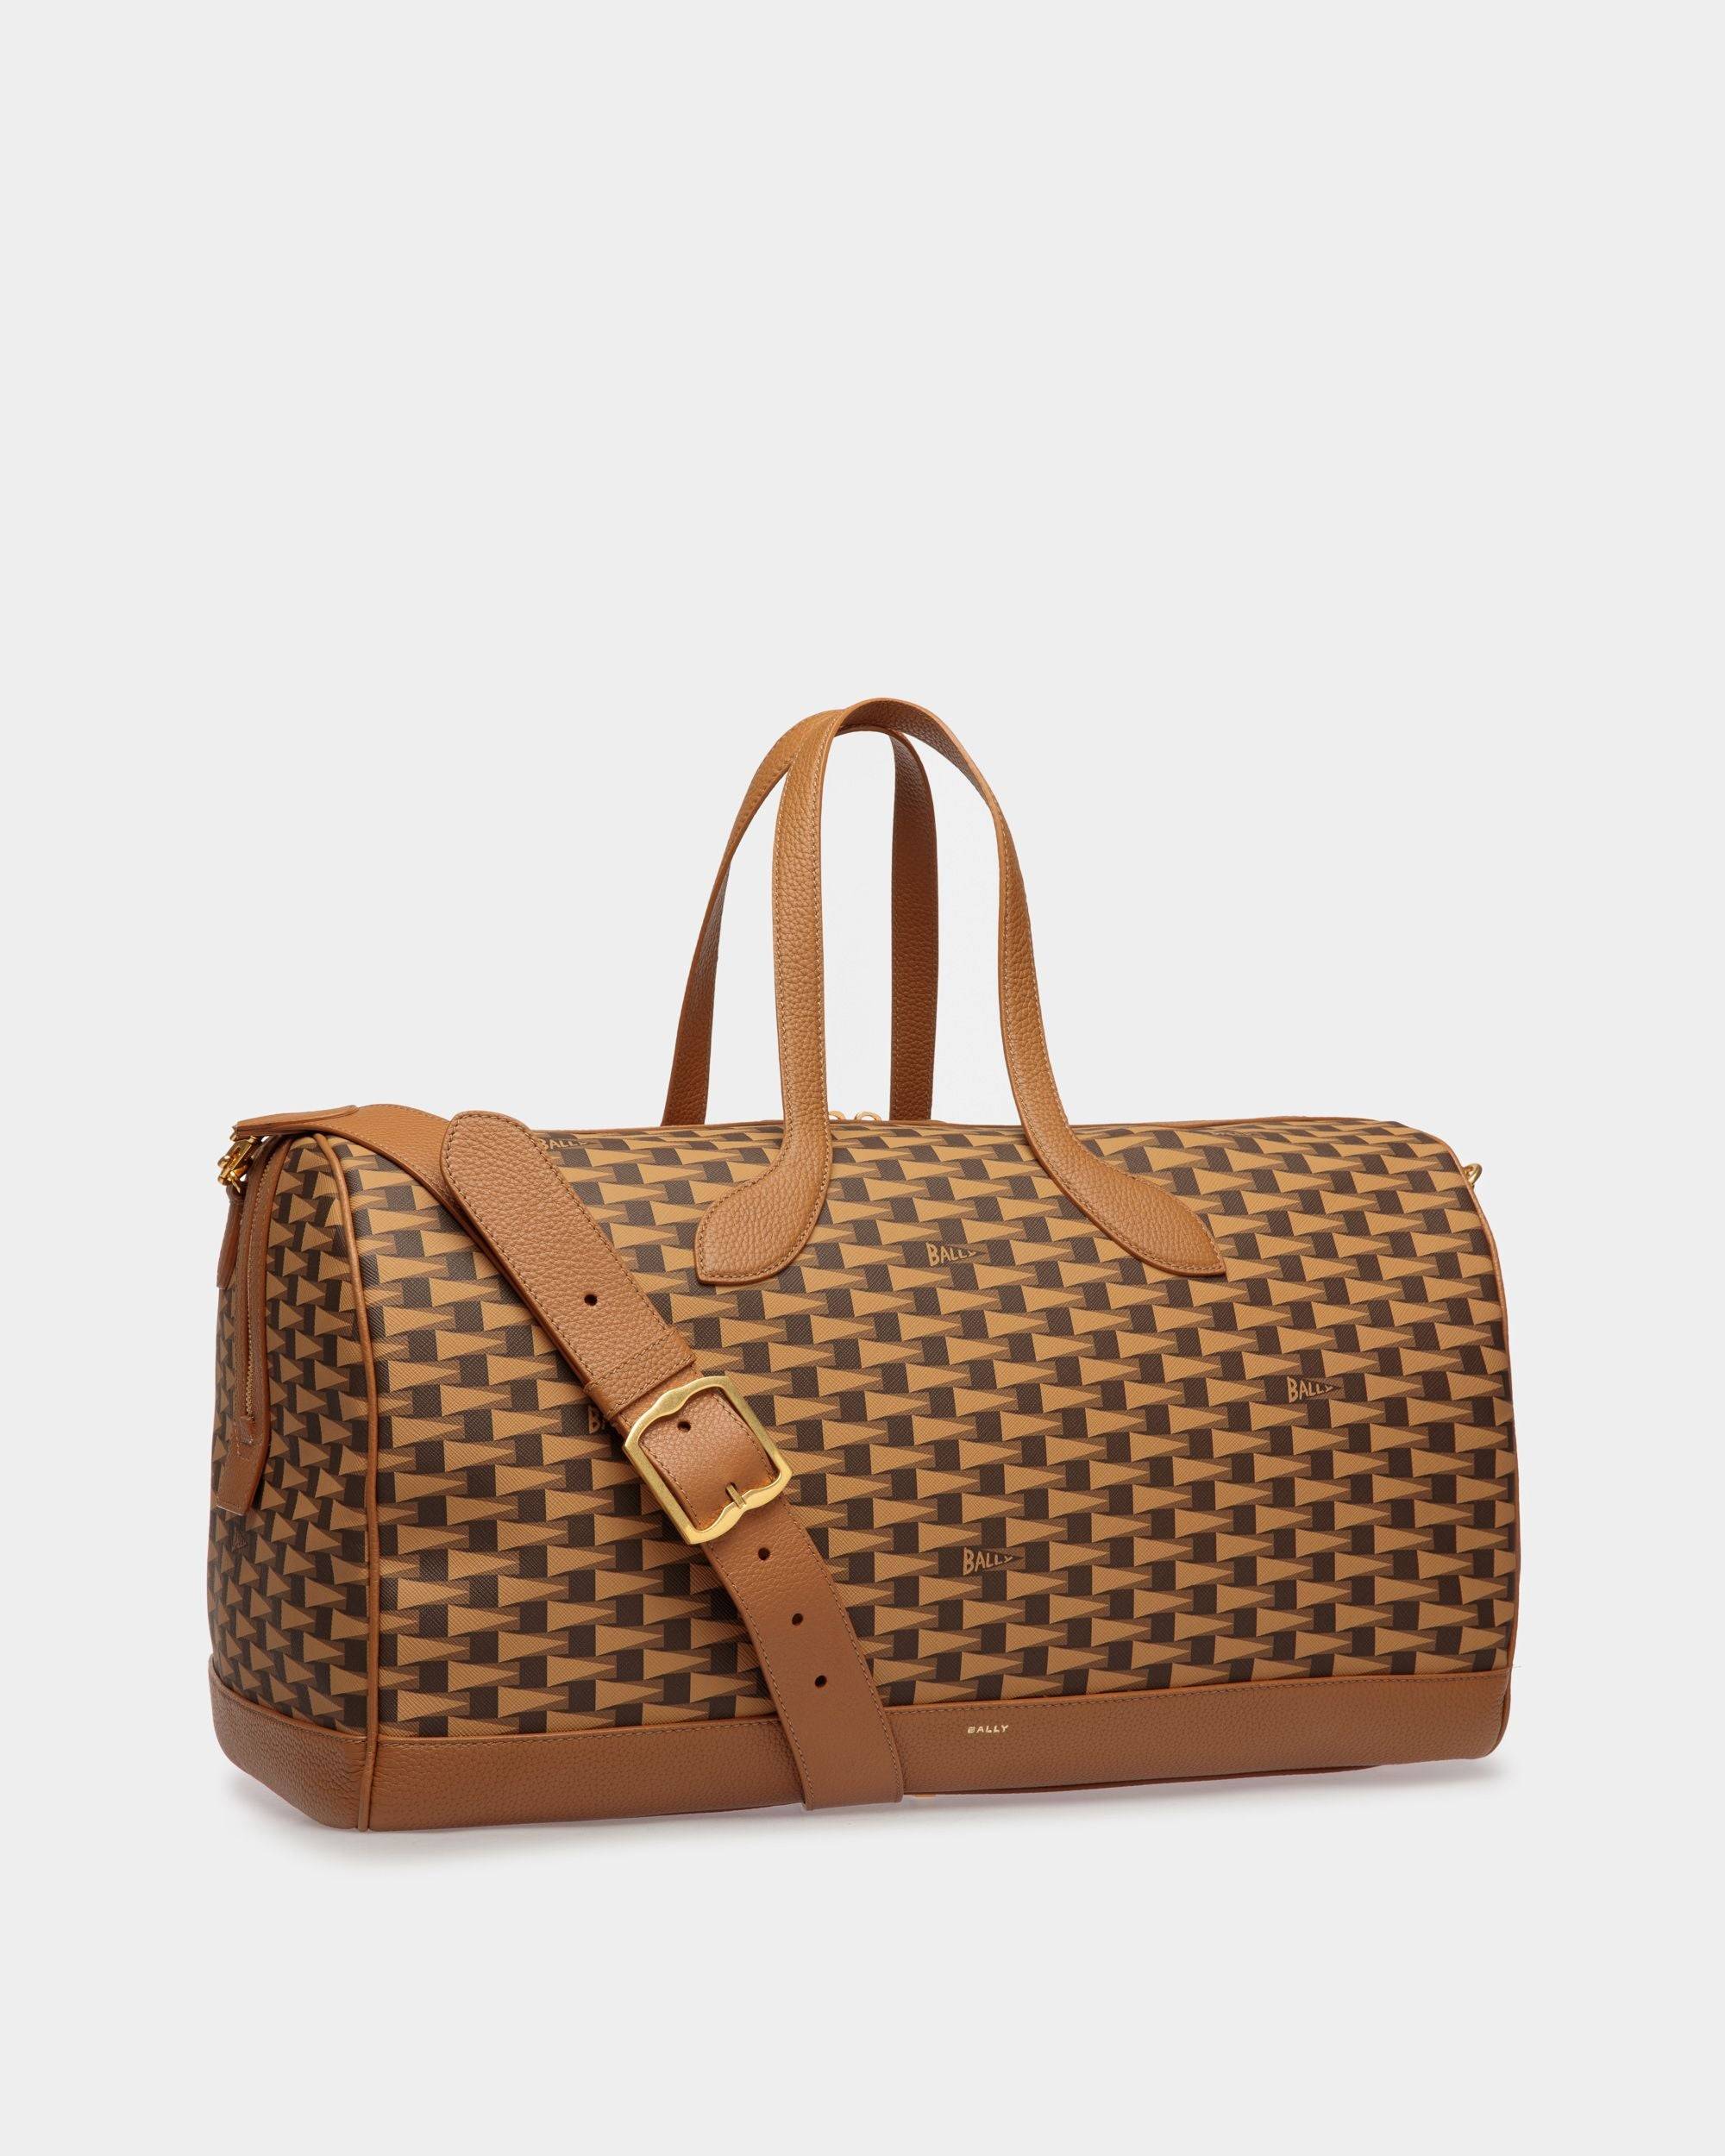 36 Hours Pennant Weekender | Men's Bag | Desert TPU and Leather | Bally | Still Life 3/4 Front